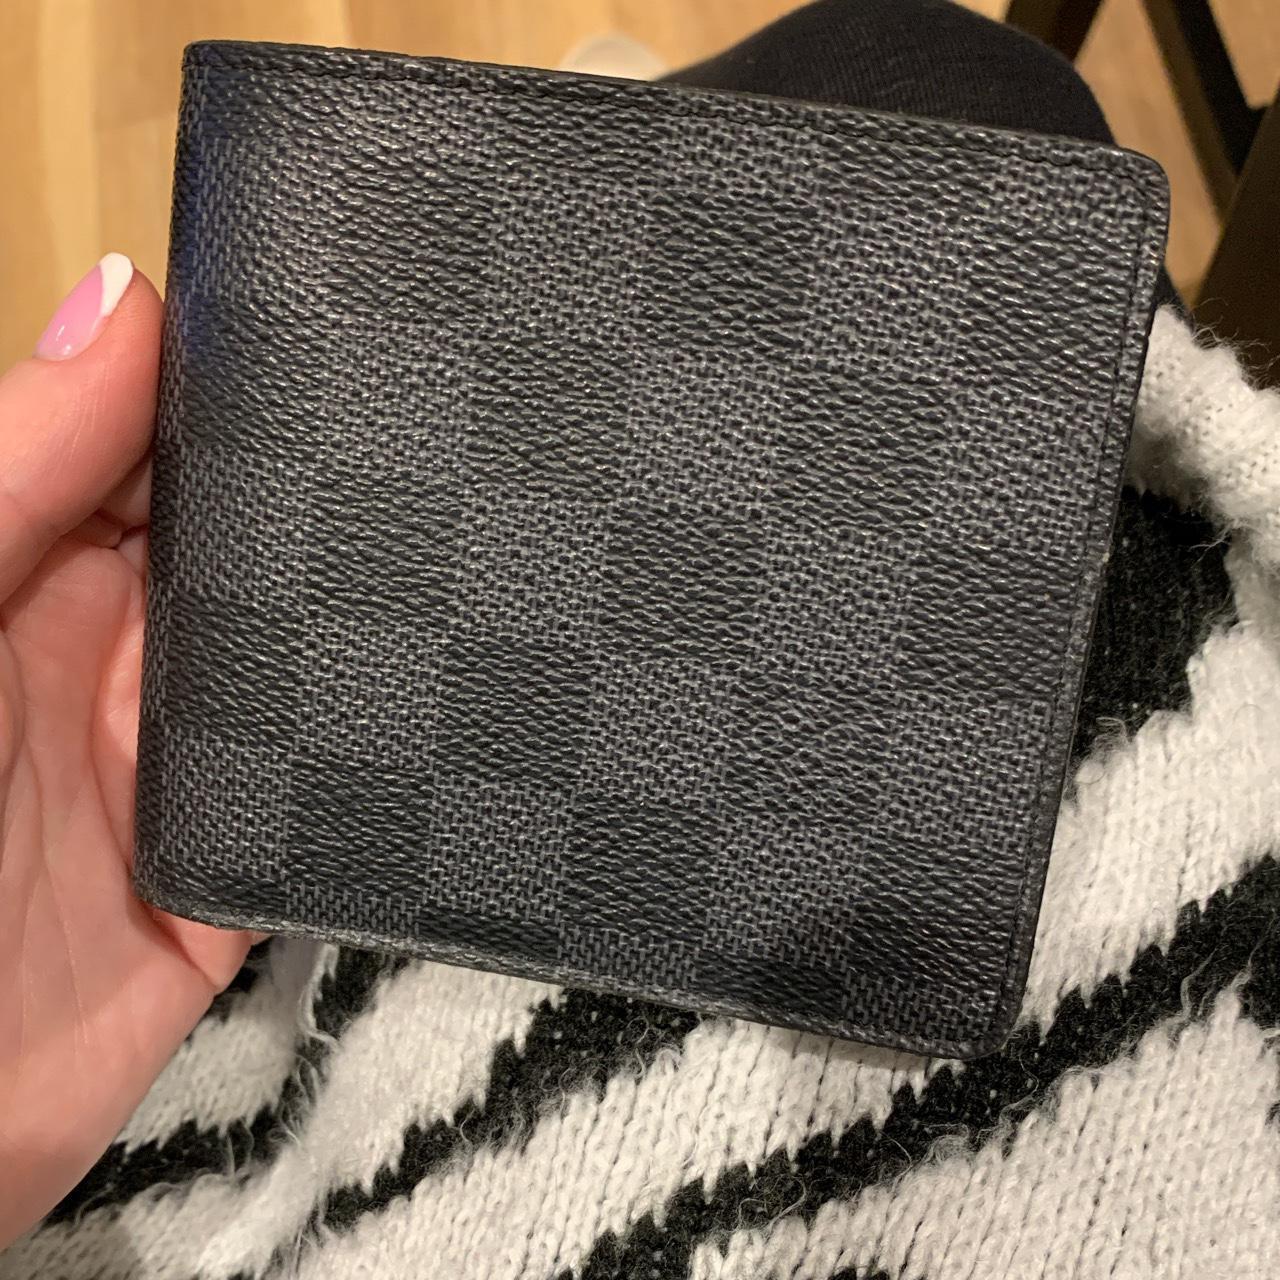 Brand new Louis Vuitton purse. Never used, was going - Depop